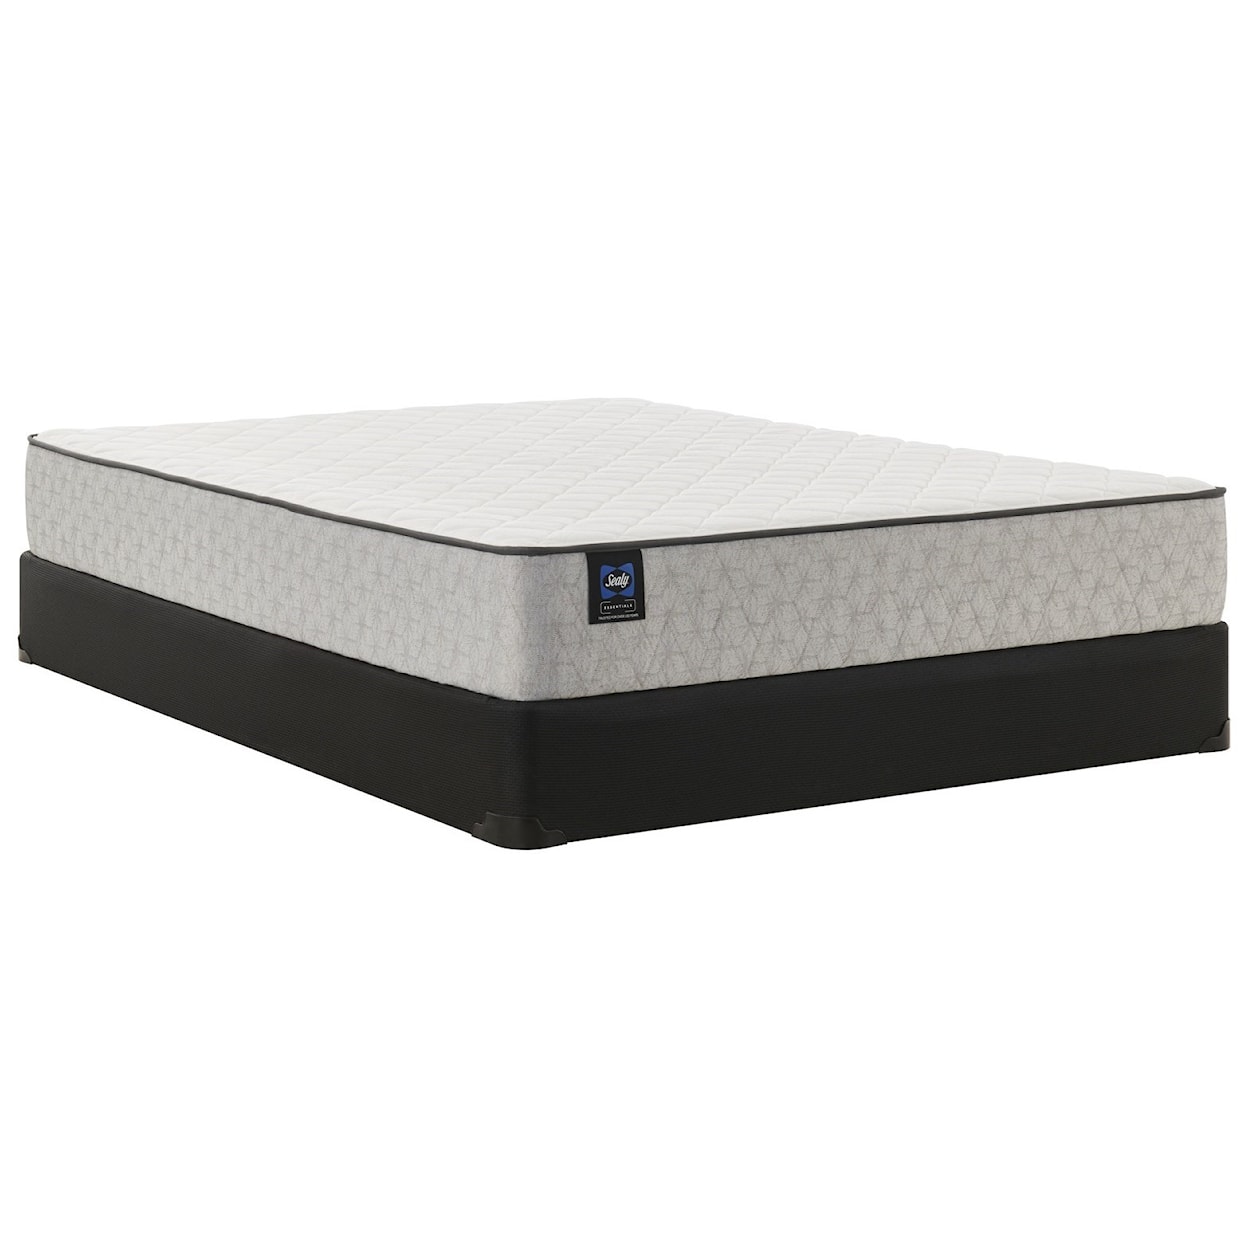 Sealy Risbury Firm TT Risbury Queen Set with Standard Box Spring